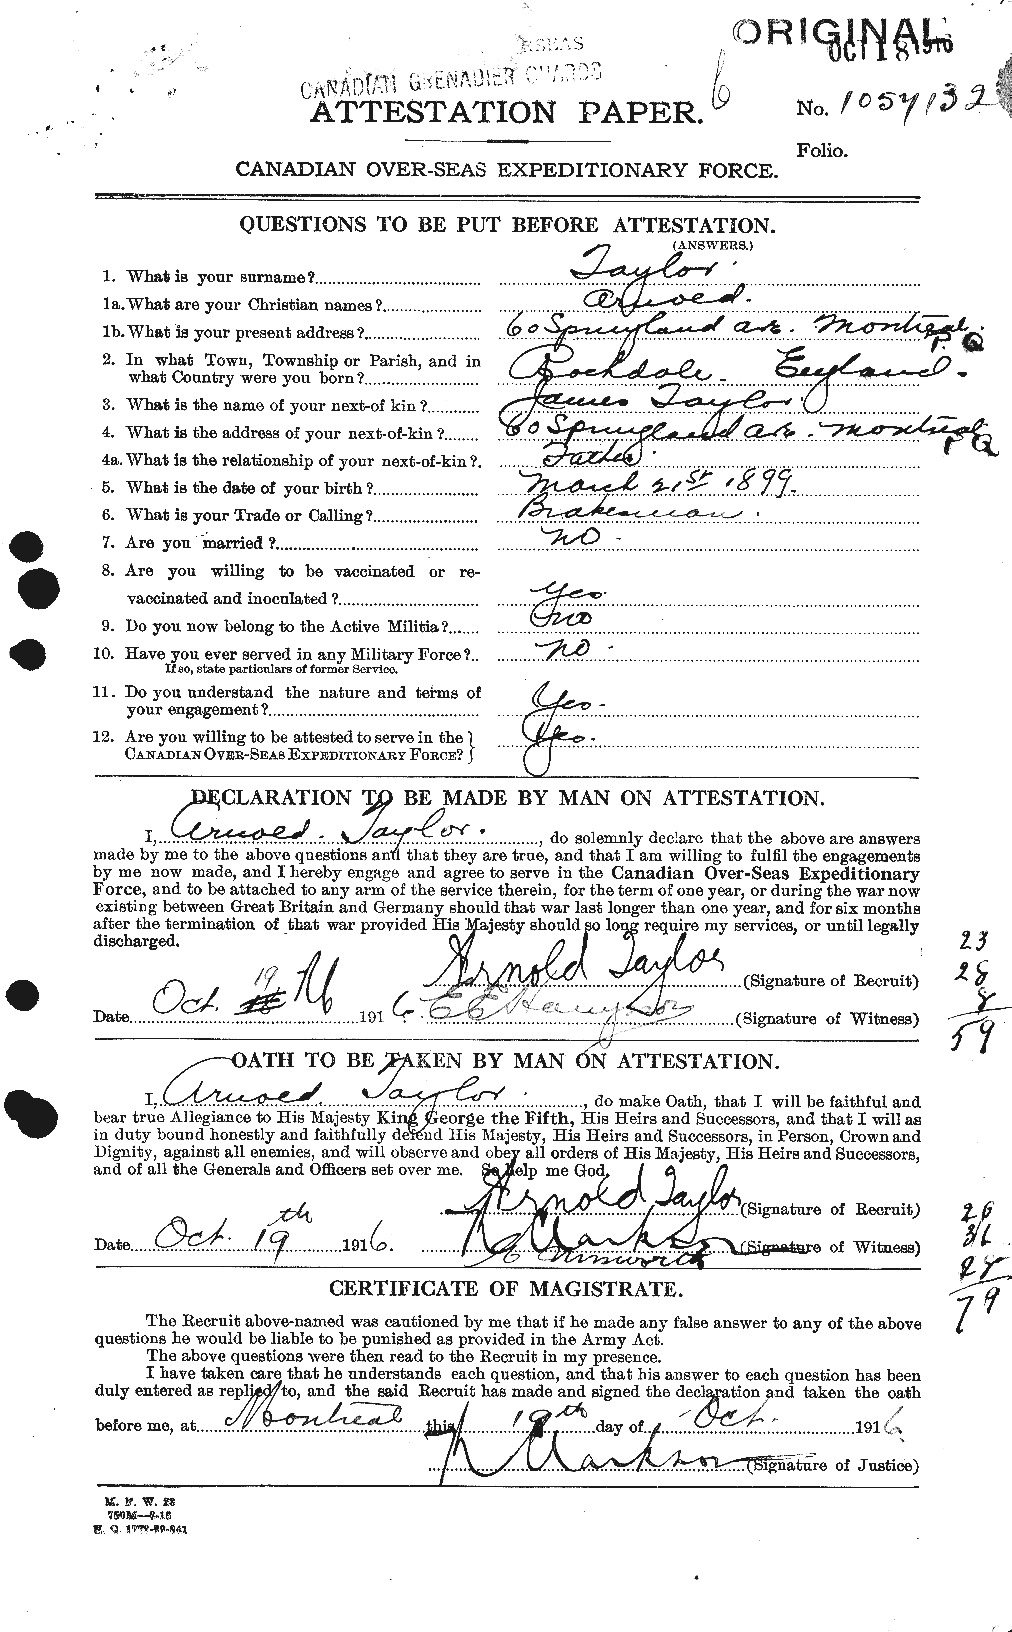 Personnel Records of the First World War - CEF 626252a